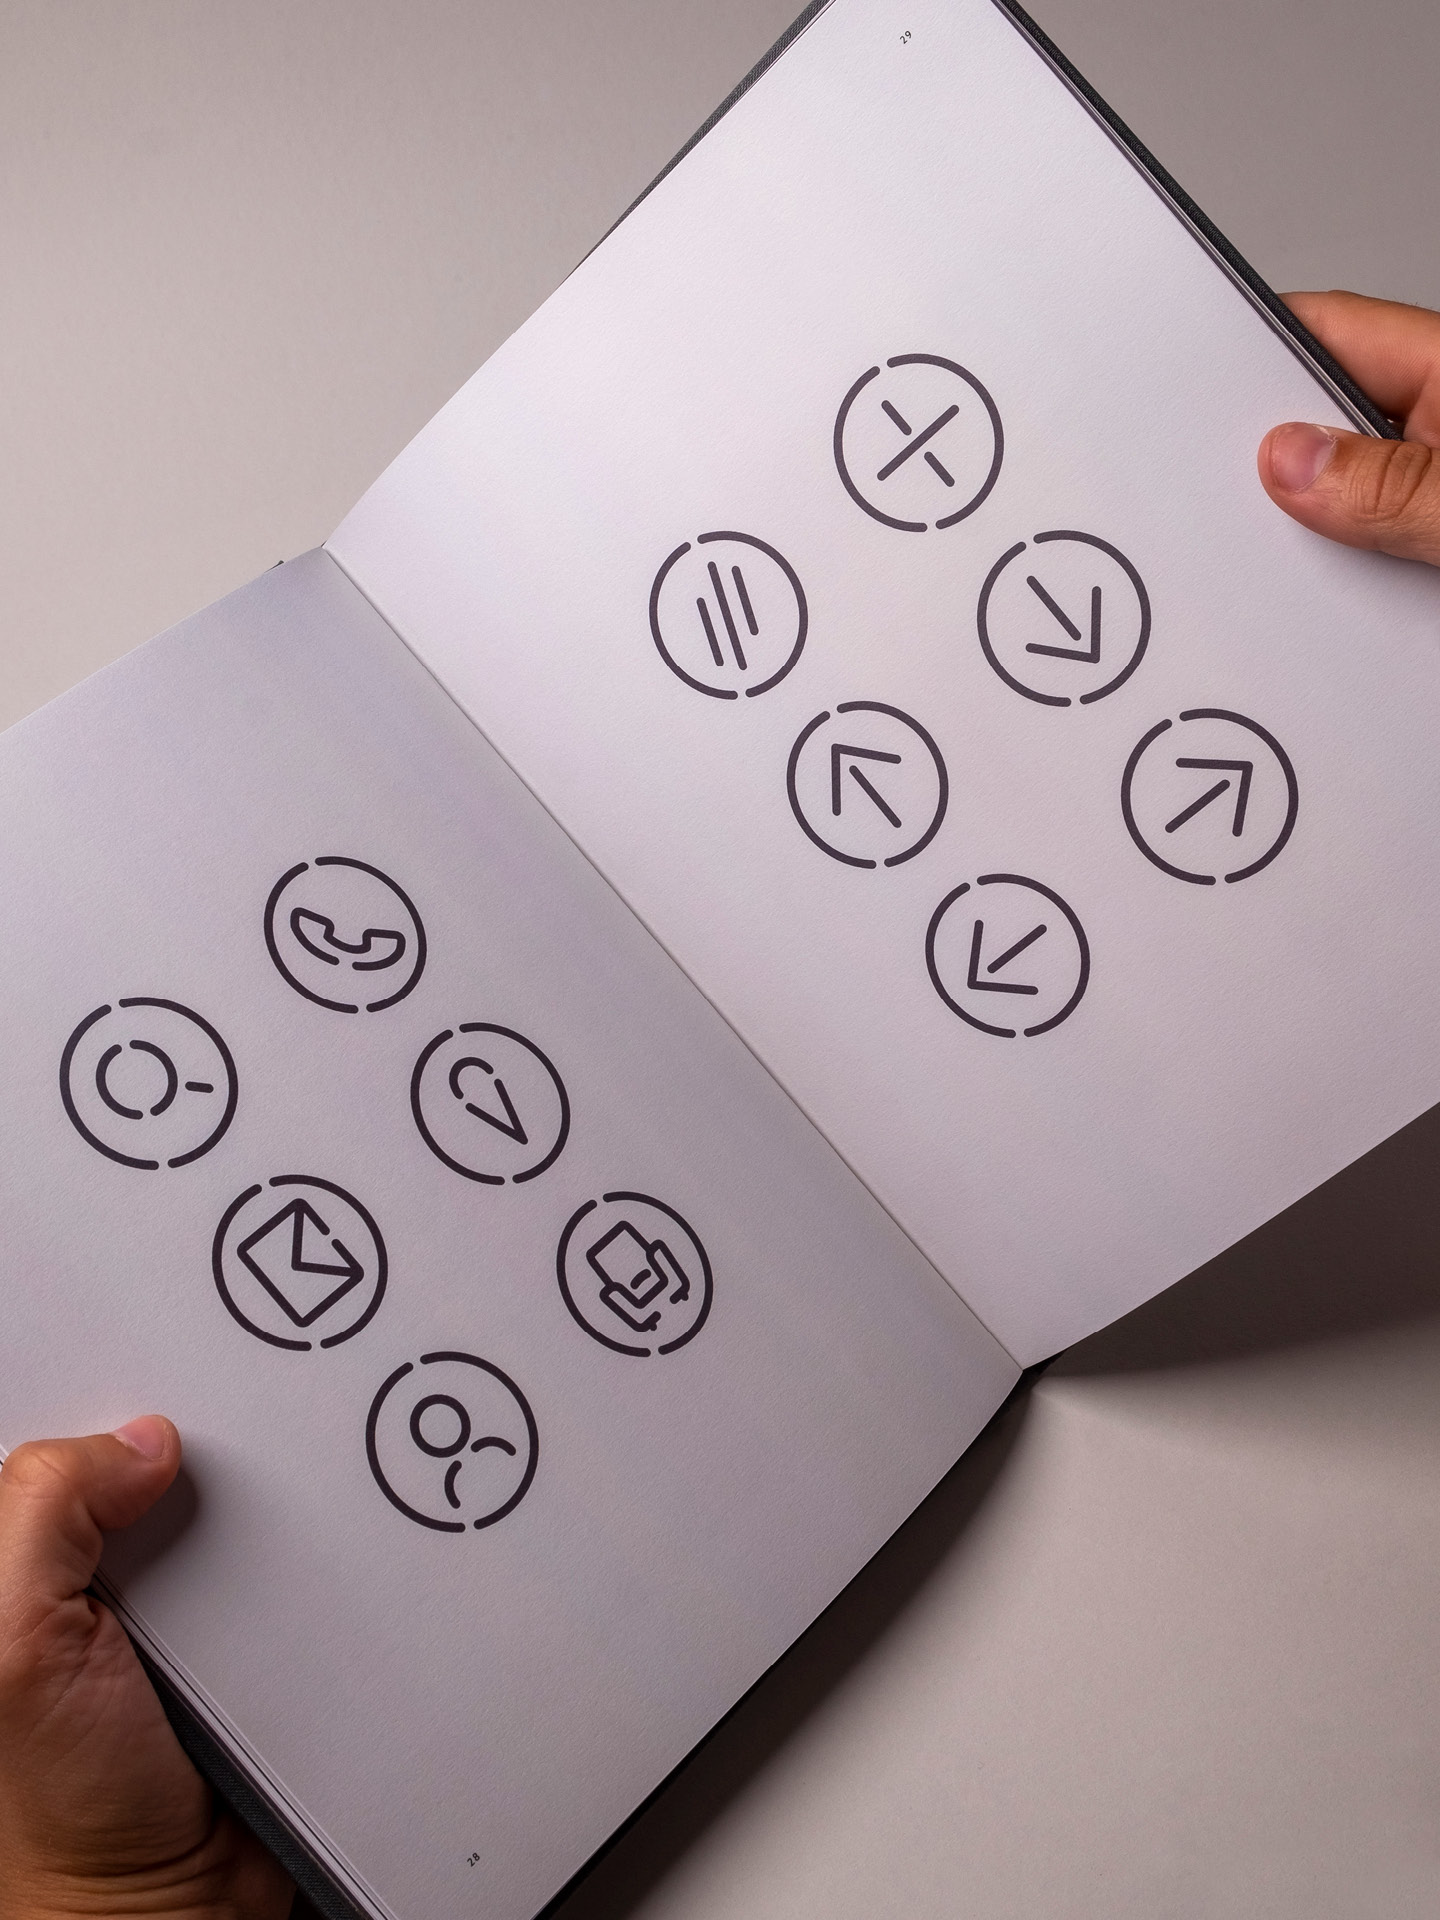 A printed spread from the brand guidelines document showcasing the custom made icons used by the brands communication